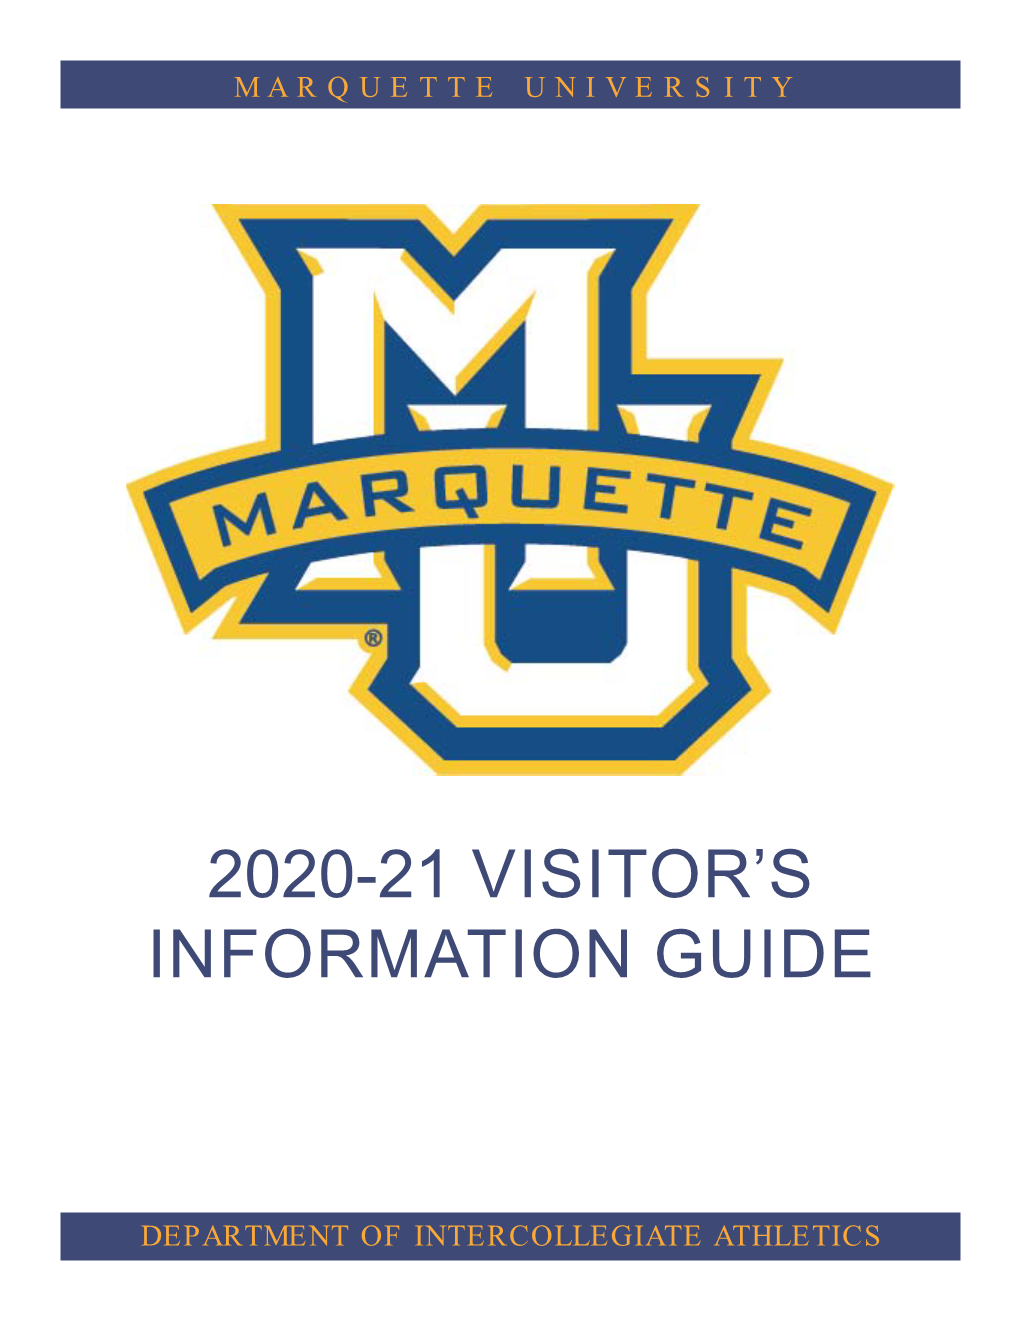 2020-21 Visitor's Information Guide